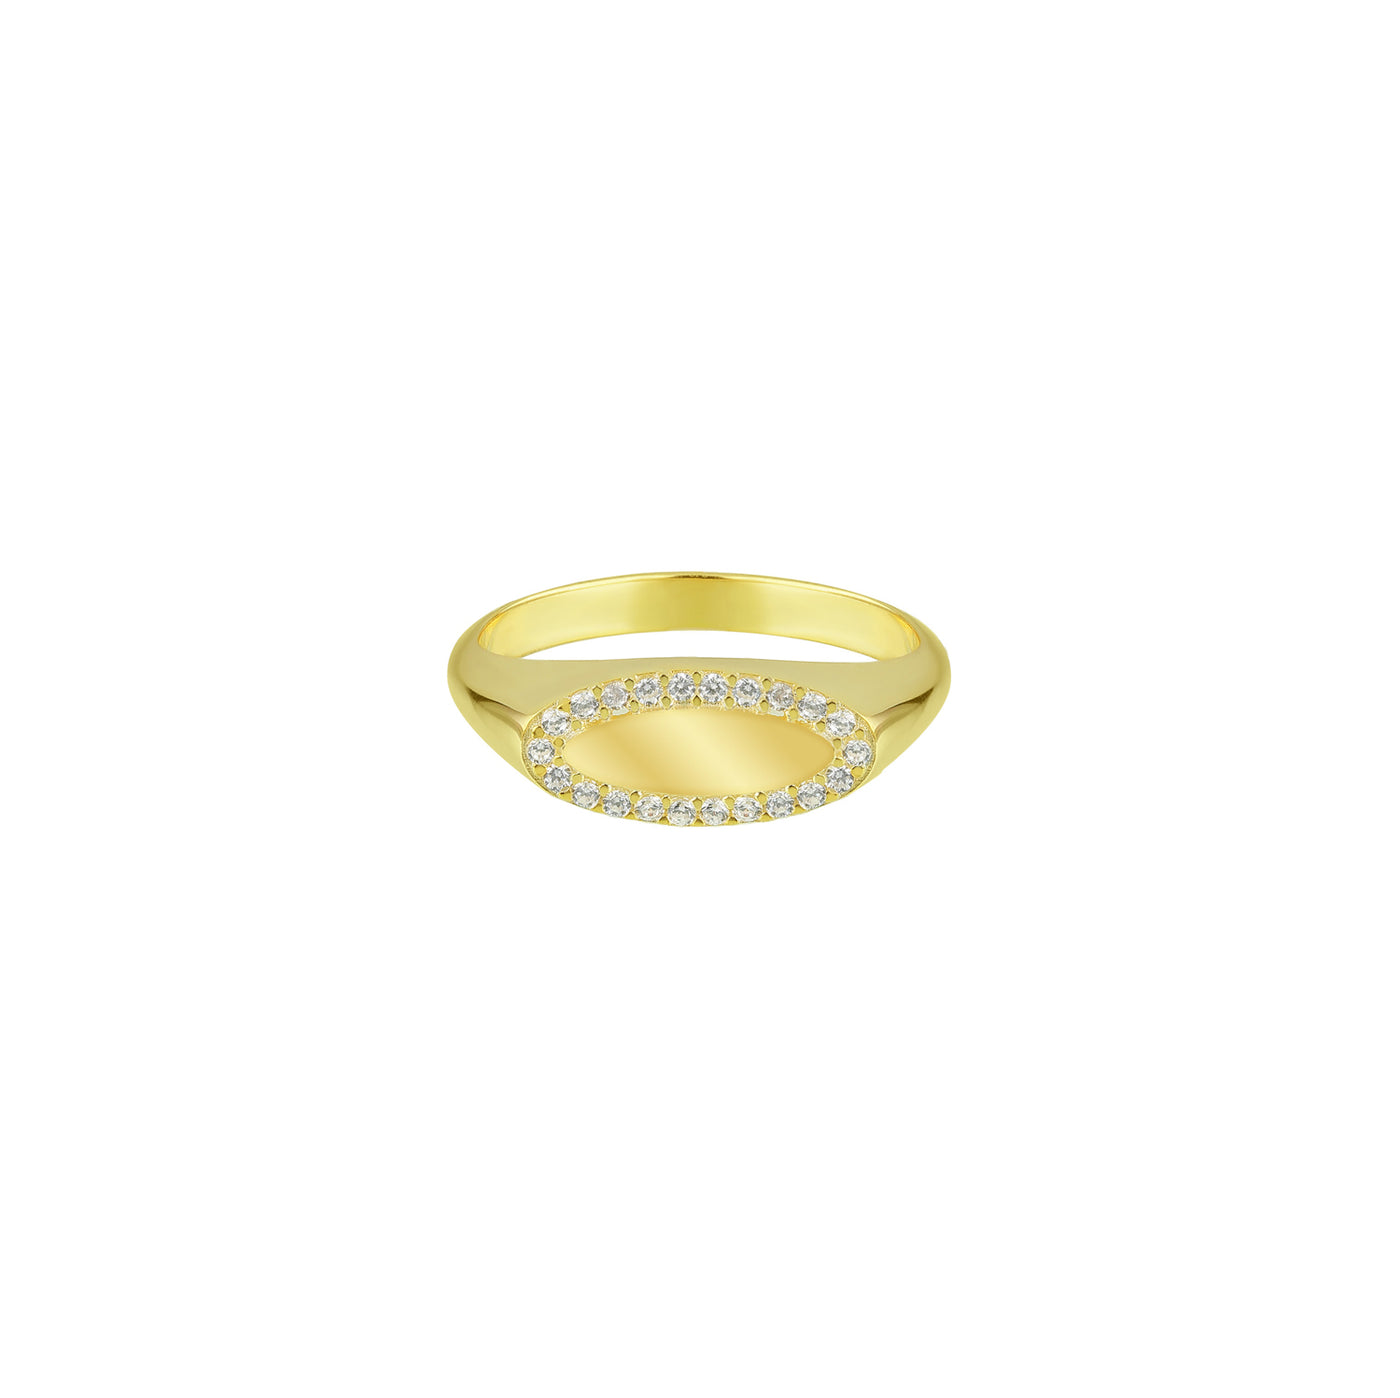 Glam signet ring with engraving